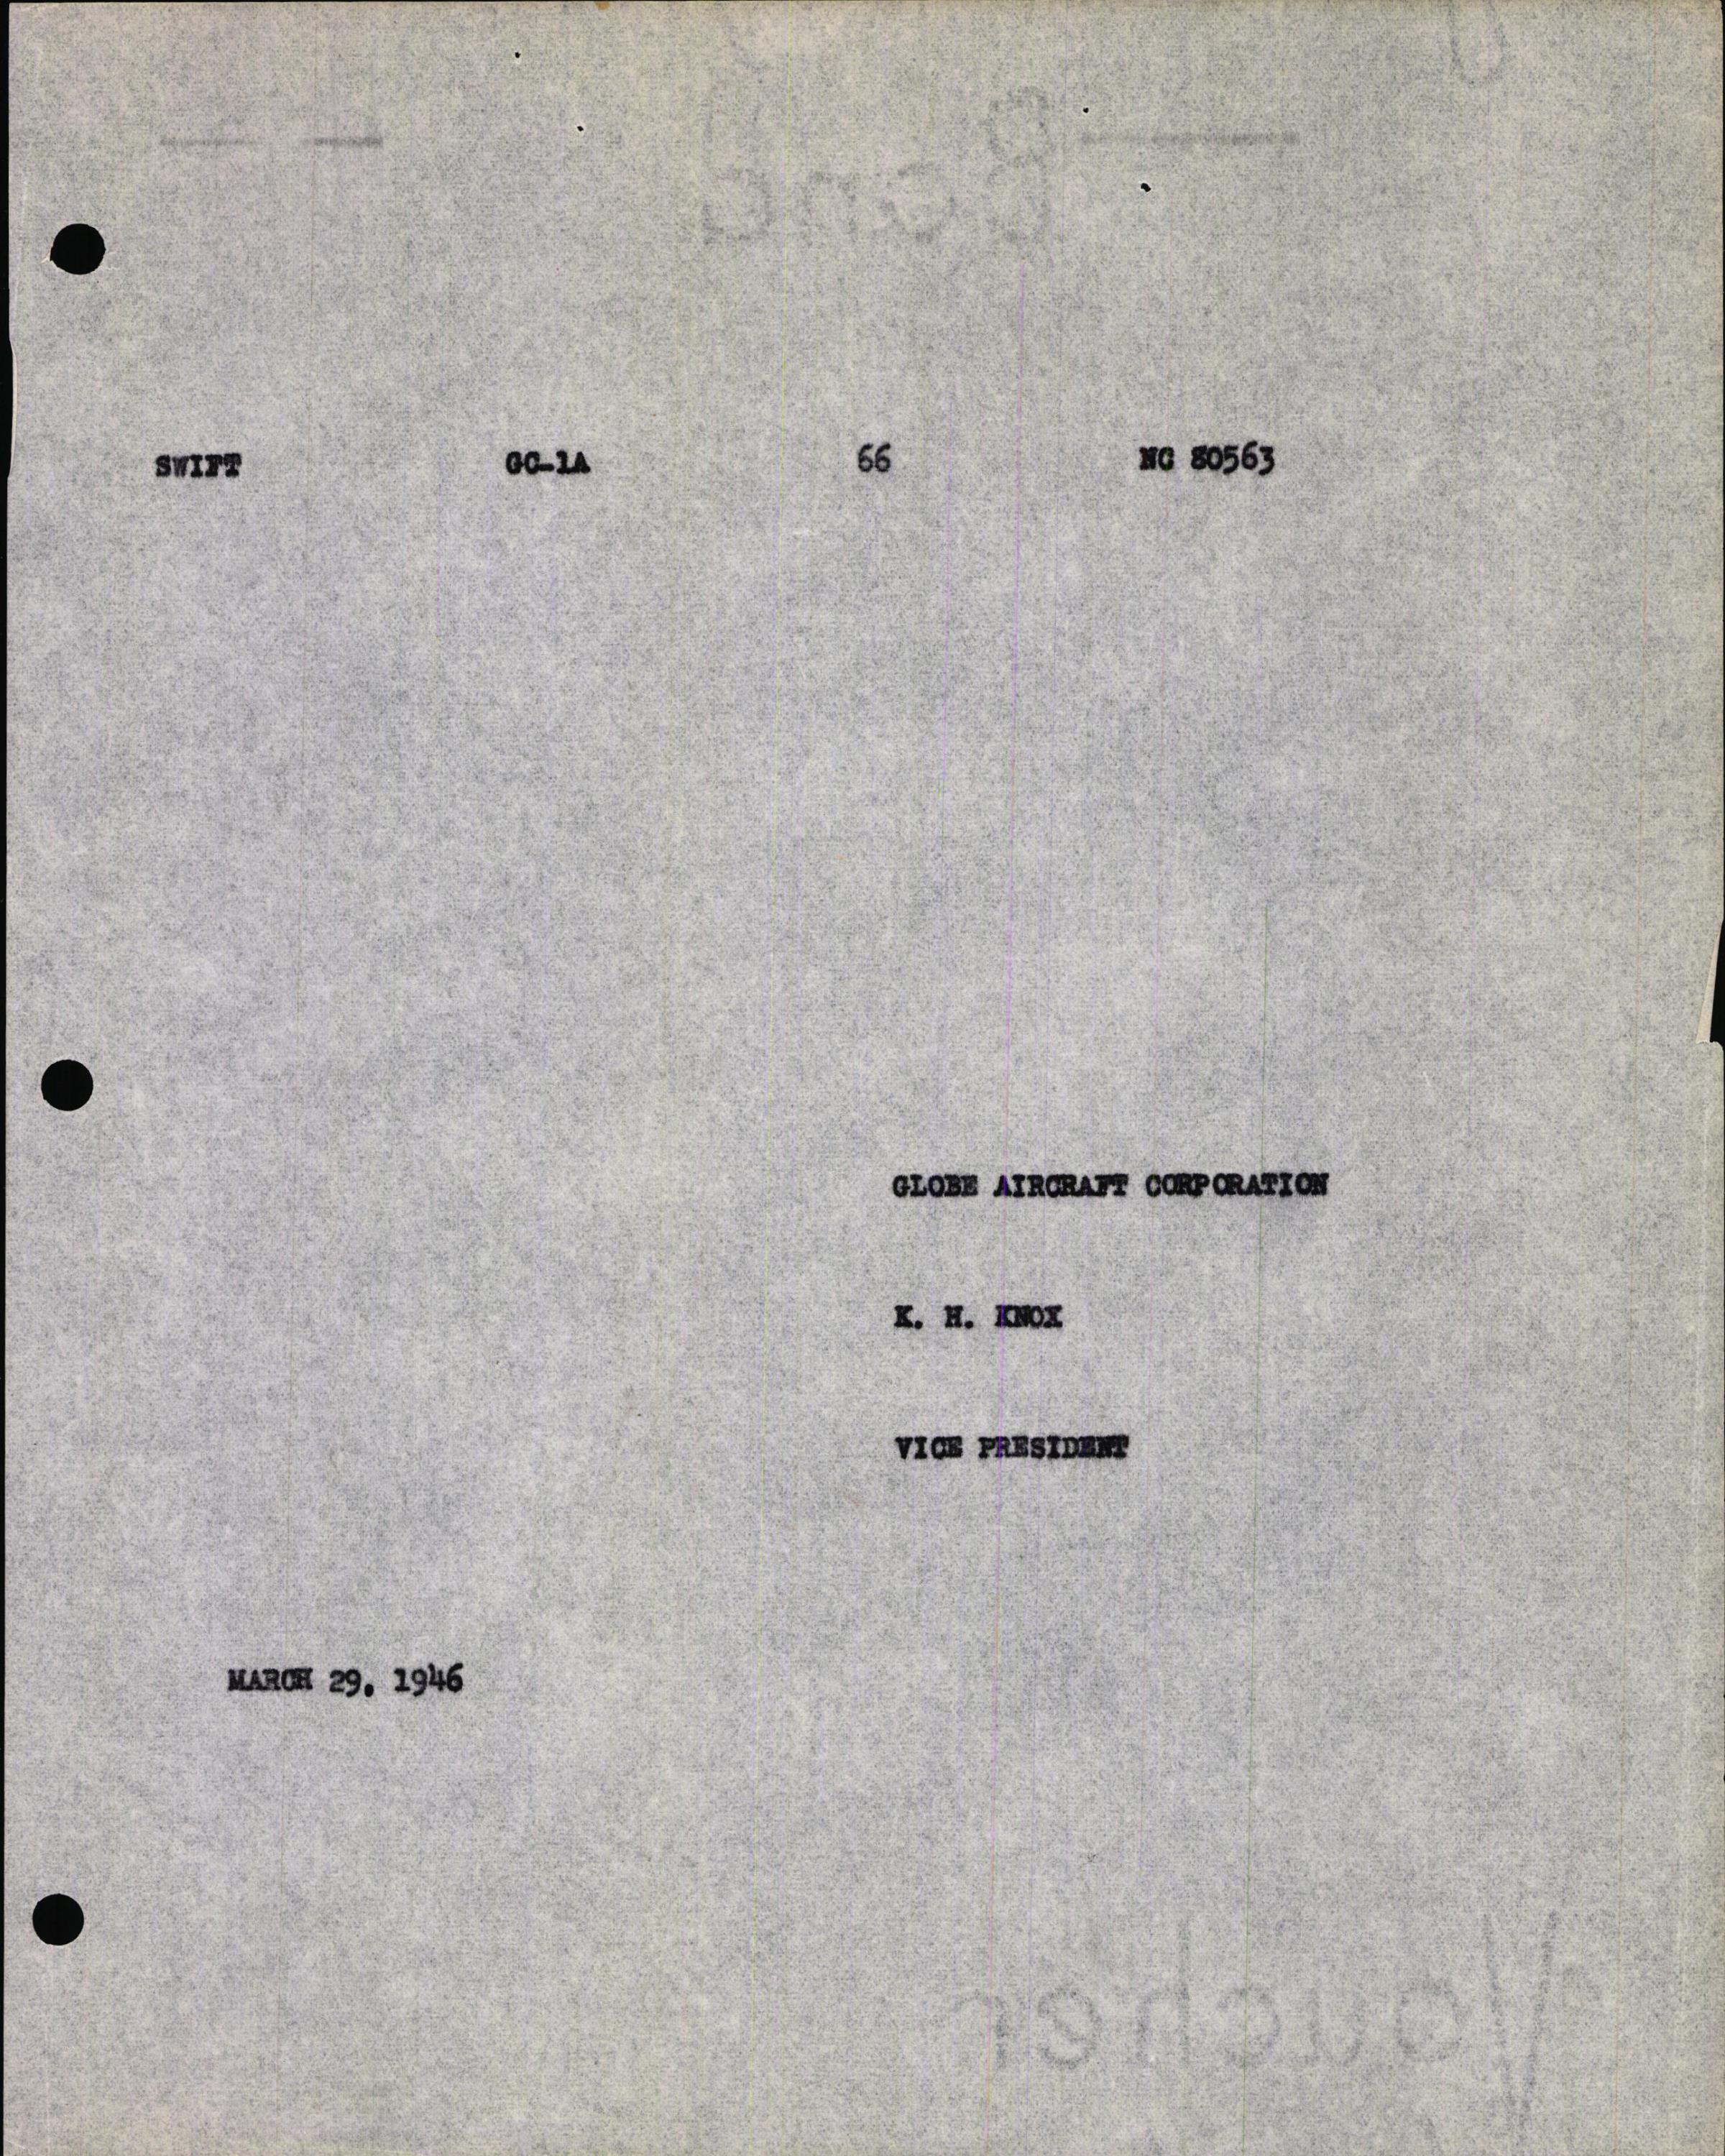 Sample page 5 from AirCorps Library document: Technical Information for Serial Number 66